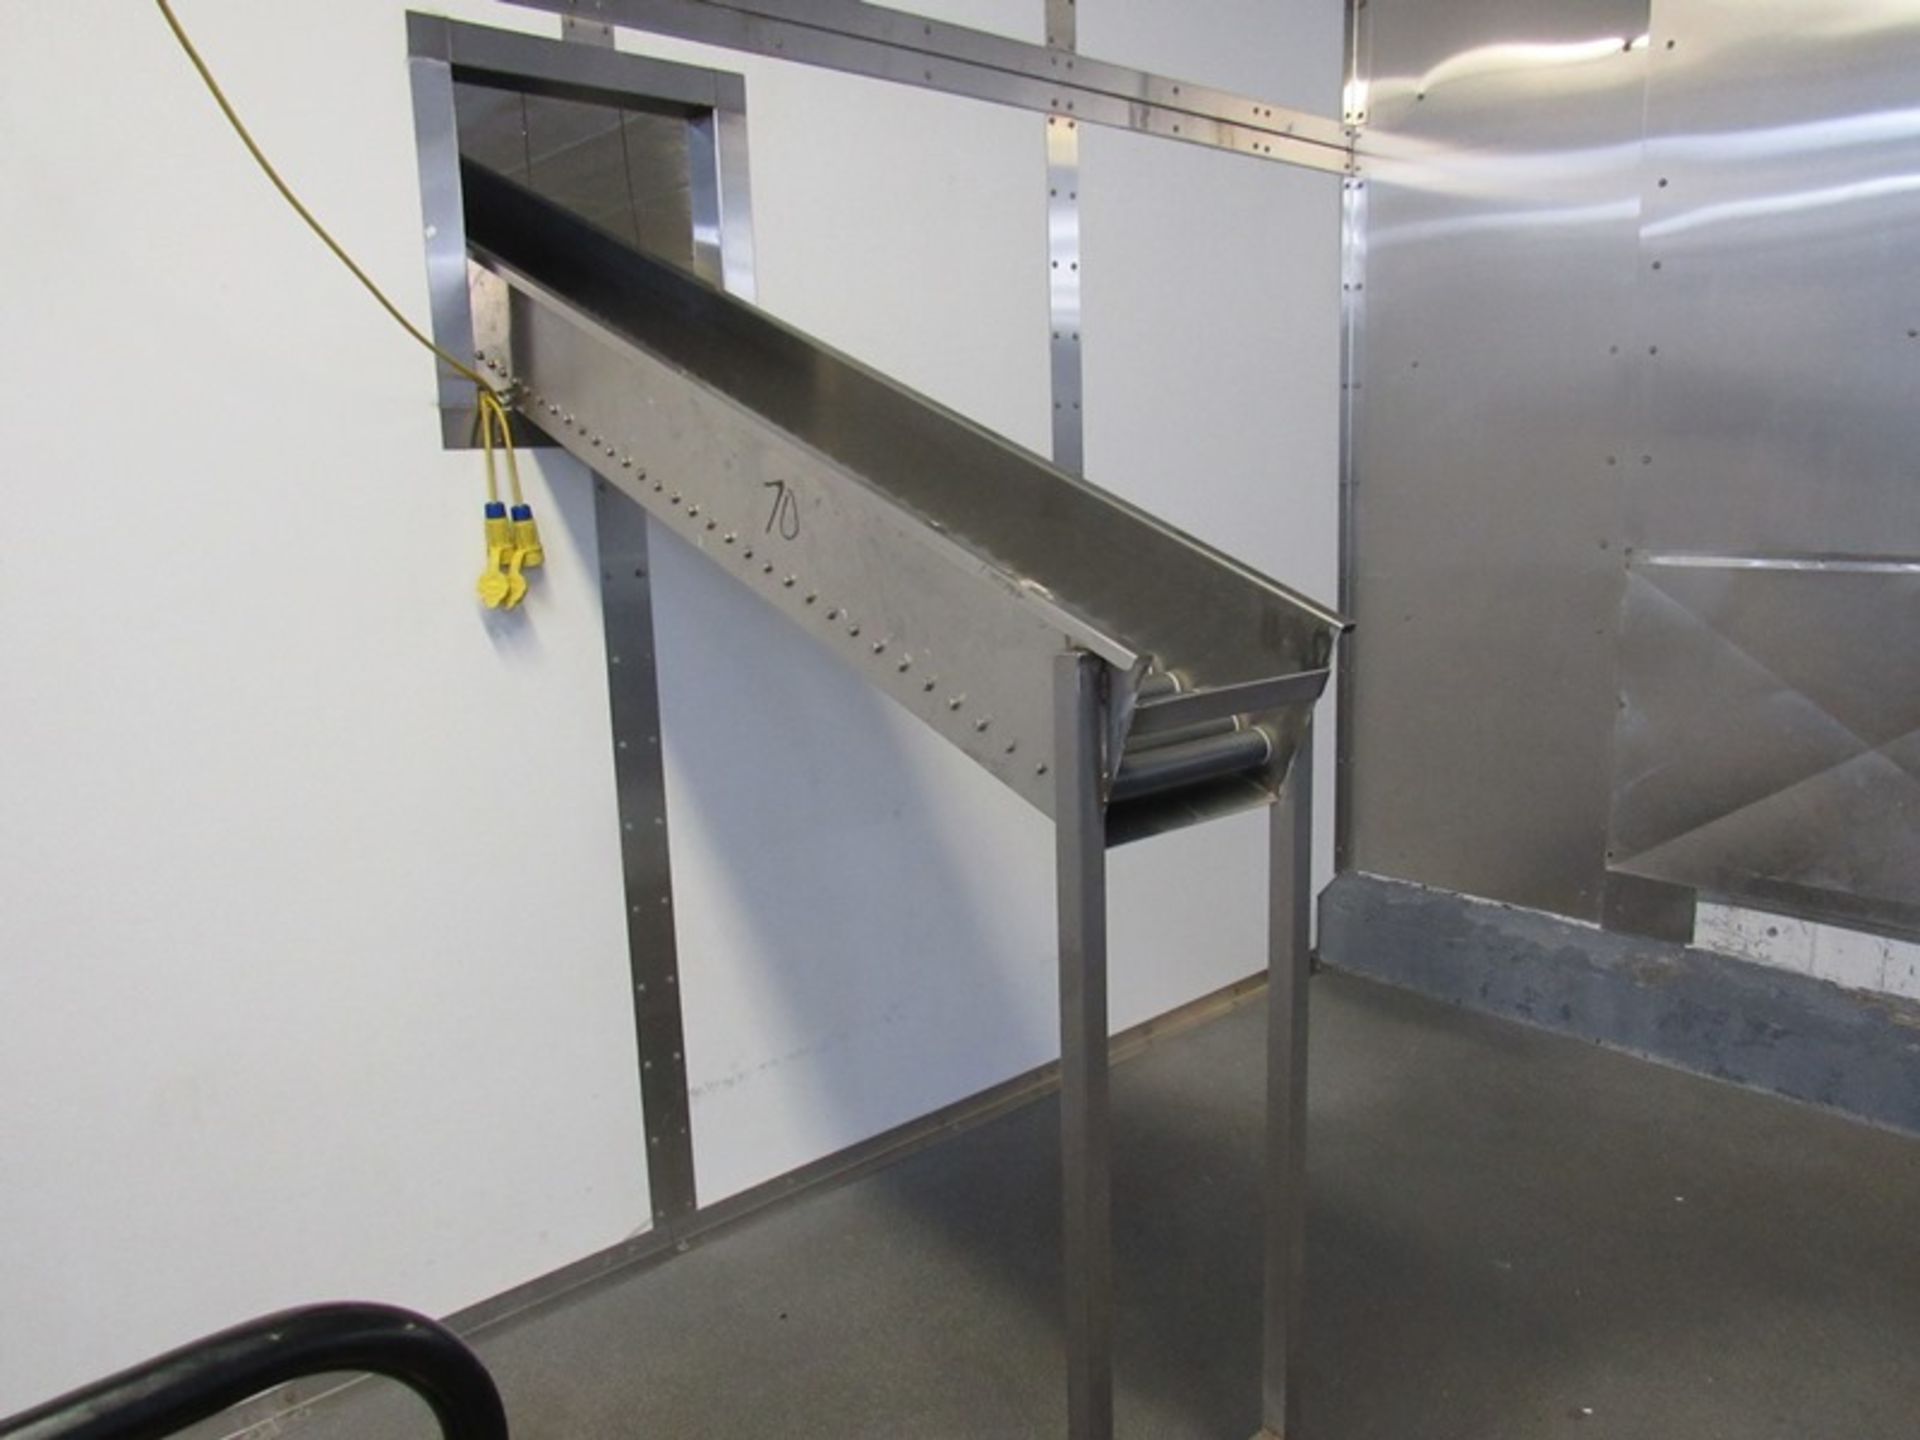 Stainless Steel Ceiling Suspend Conveyor, 12" W X 90' L, 1 h.p. motor, incline/decline (Required - Image 9 of 10